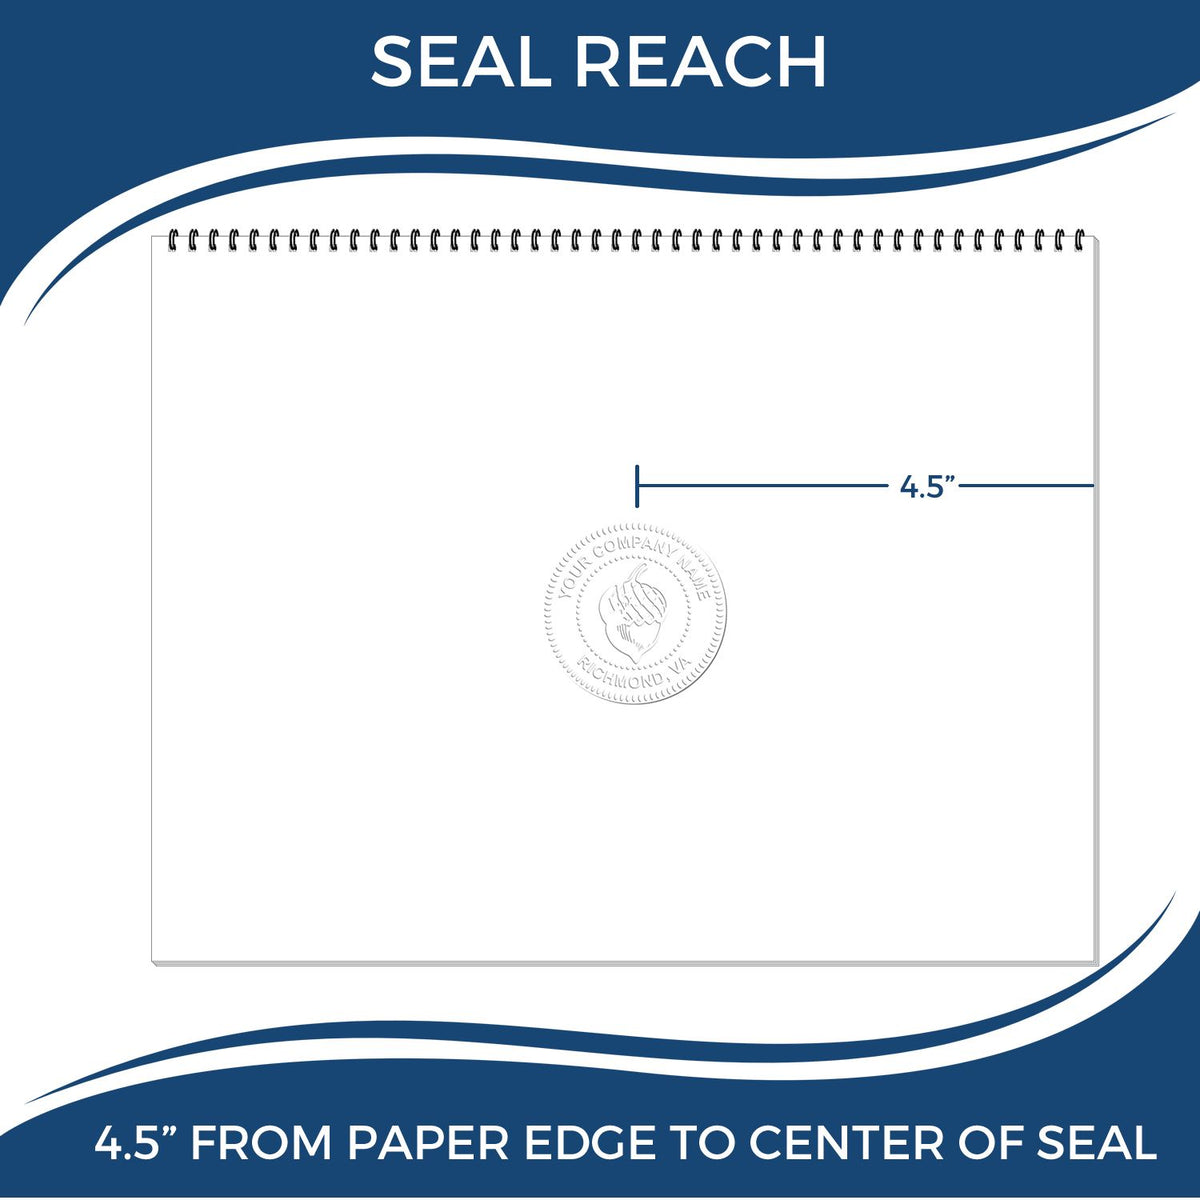 An infographic showing the seal reach which is represented by a ruler and a miniature seal image of the Extended Long Reach Alabama Surveyor Embosser